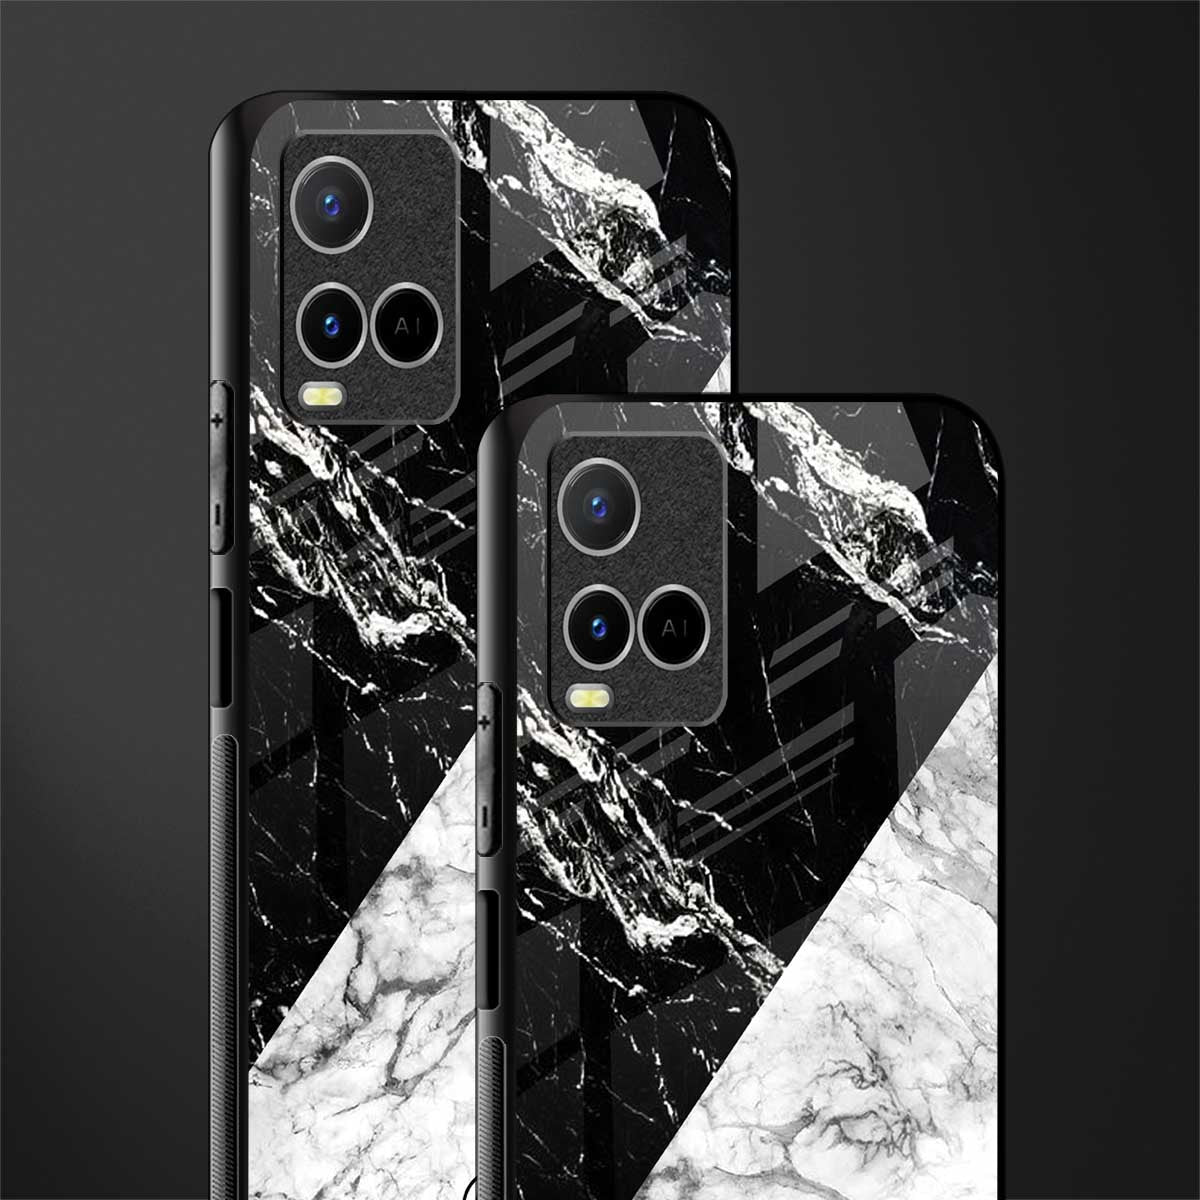 fatal contradiction phone cover for vivo y21t